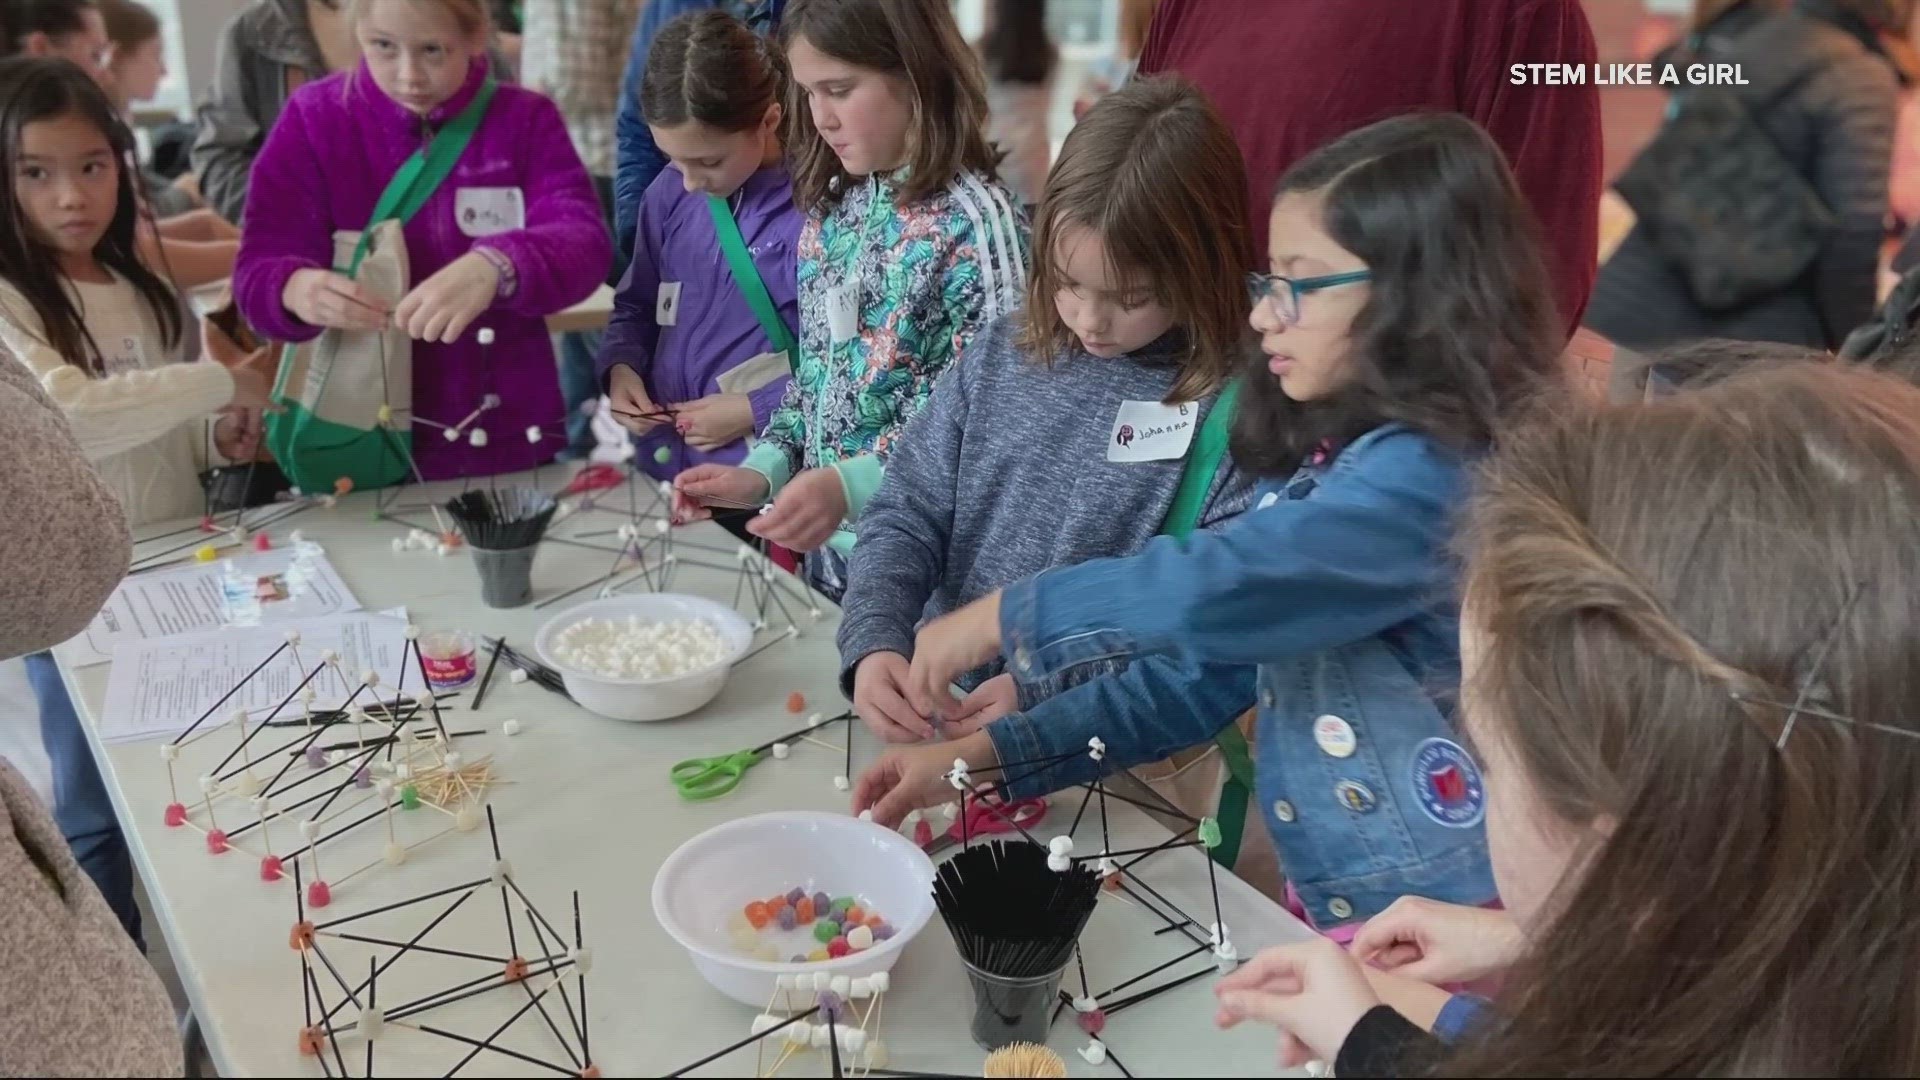 STEM Like a Girl creates parent-daughter workshop activities for third and fifth-grade girls. They solve fun science and engineering challenges together.